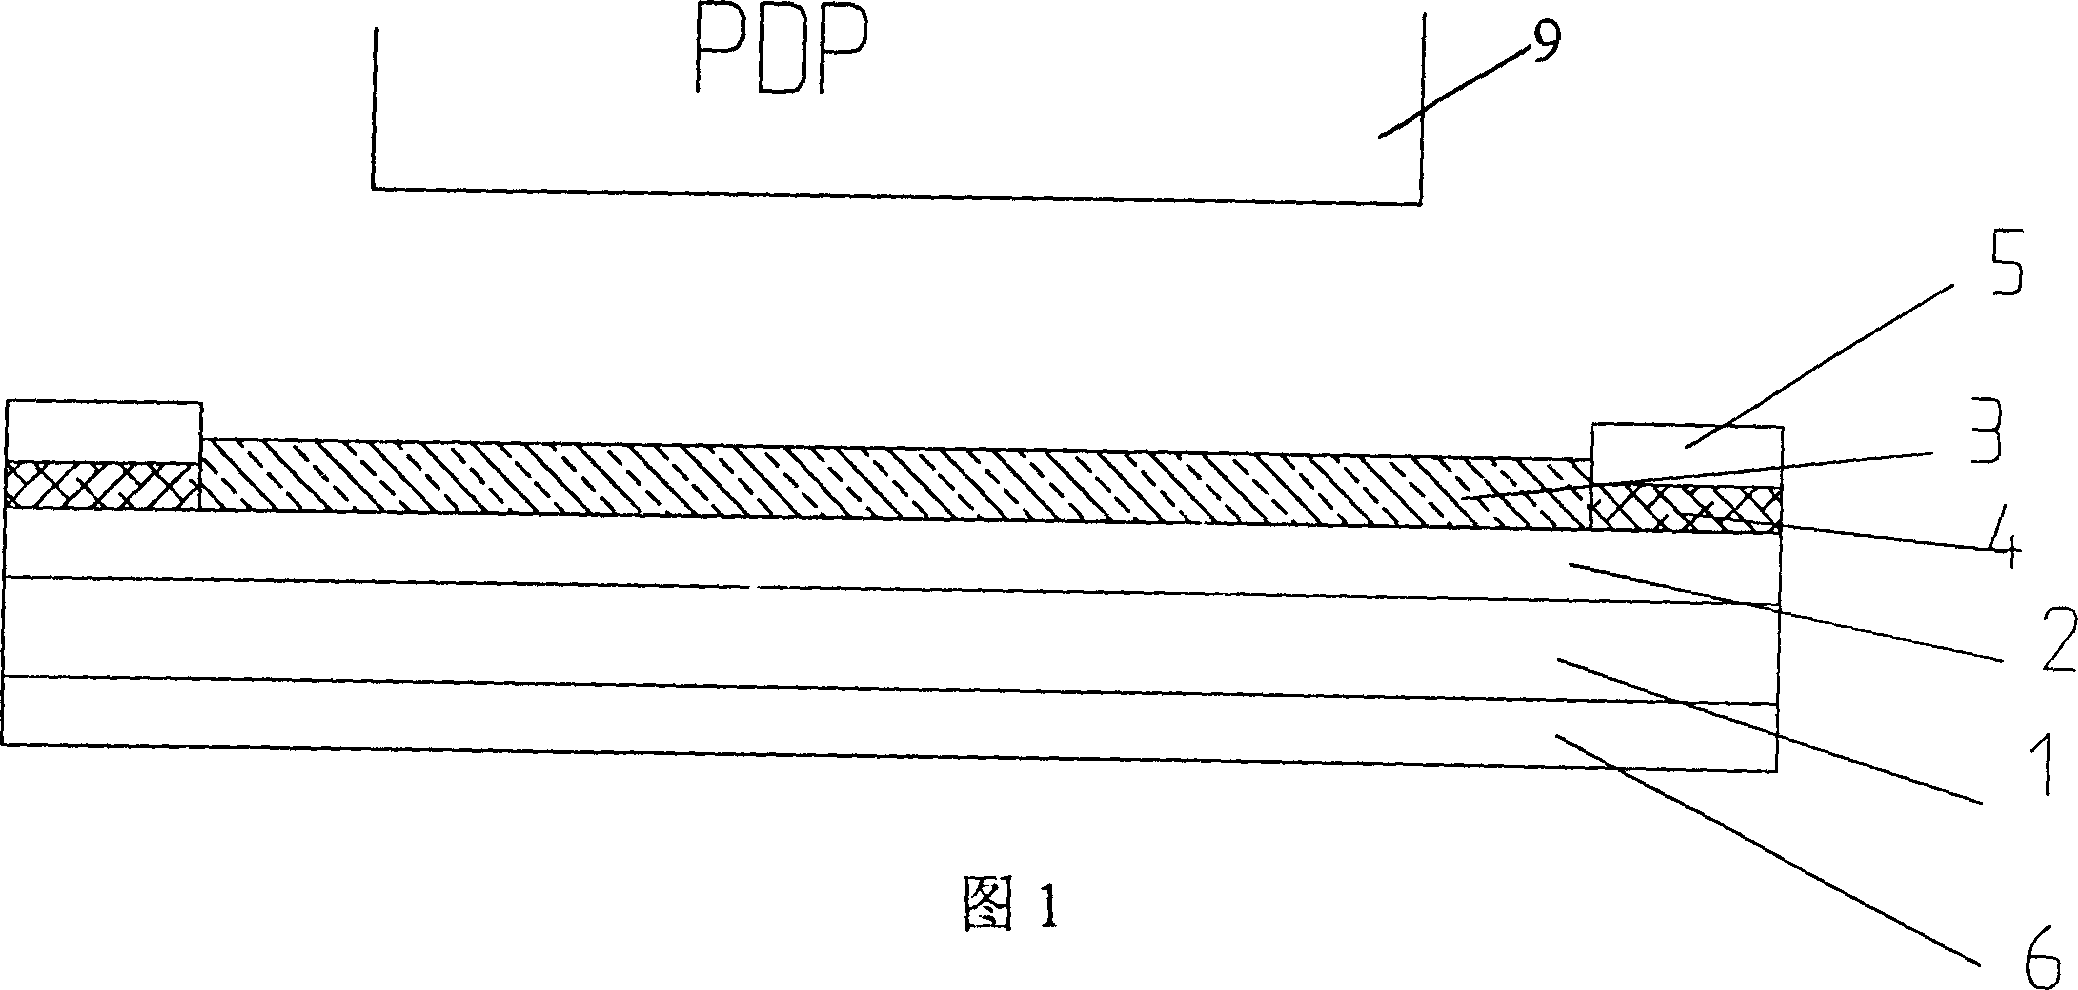 Light filtering plate with function of preventing electromagnetic radiation and filtering light for plasma display